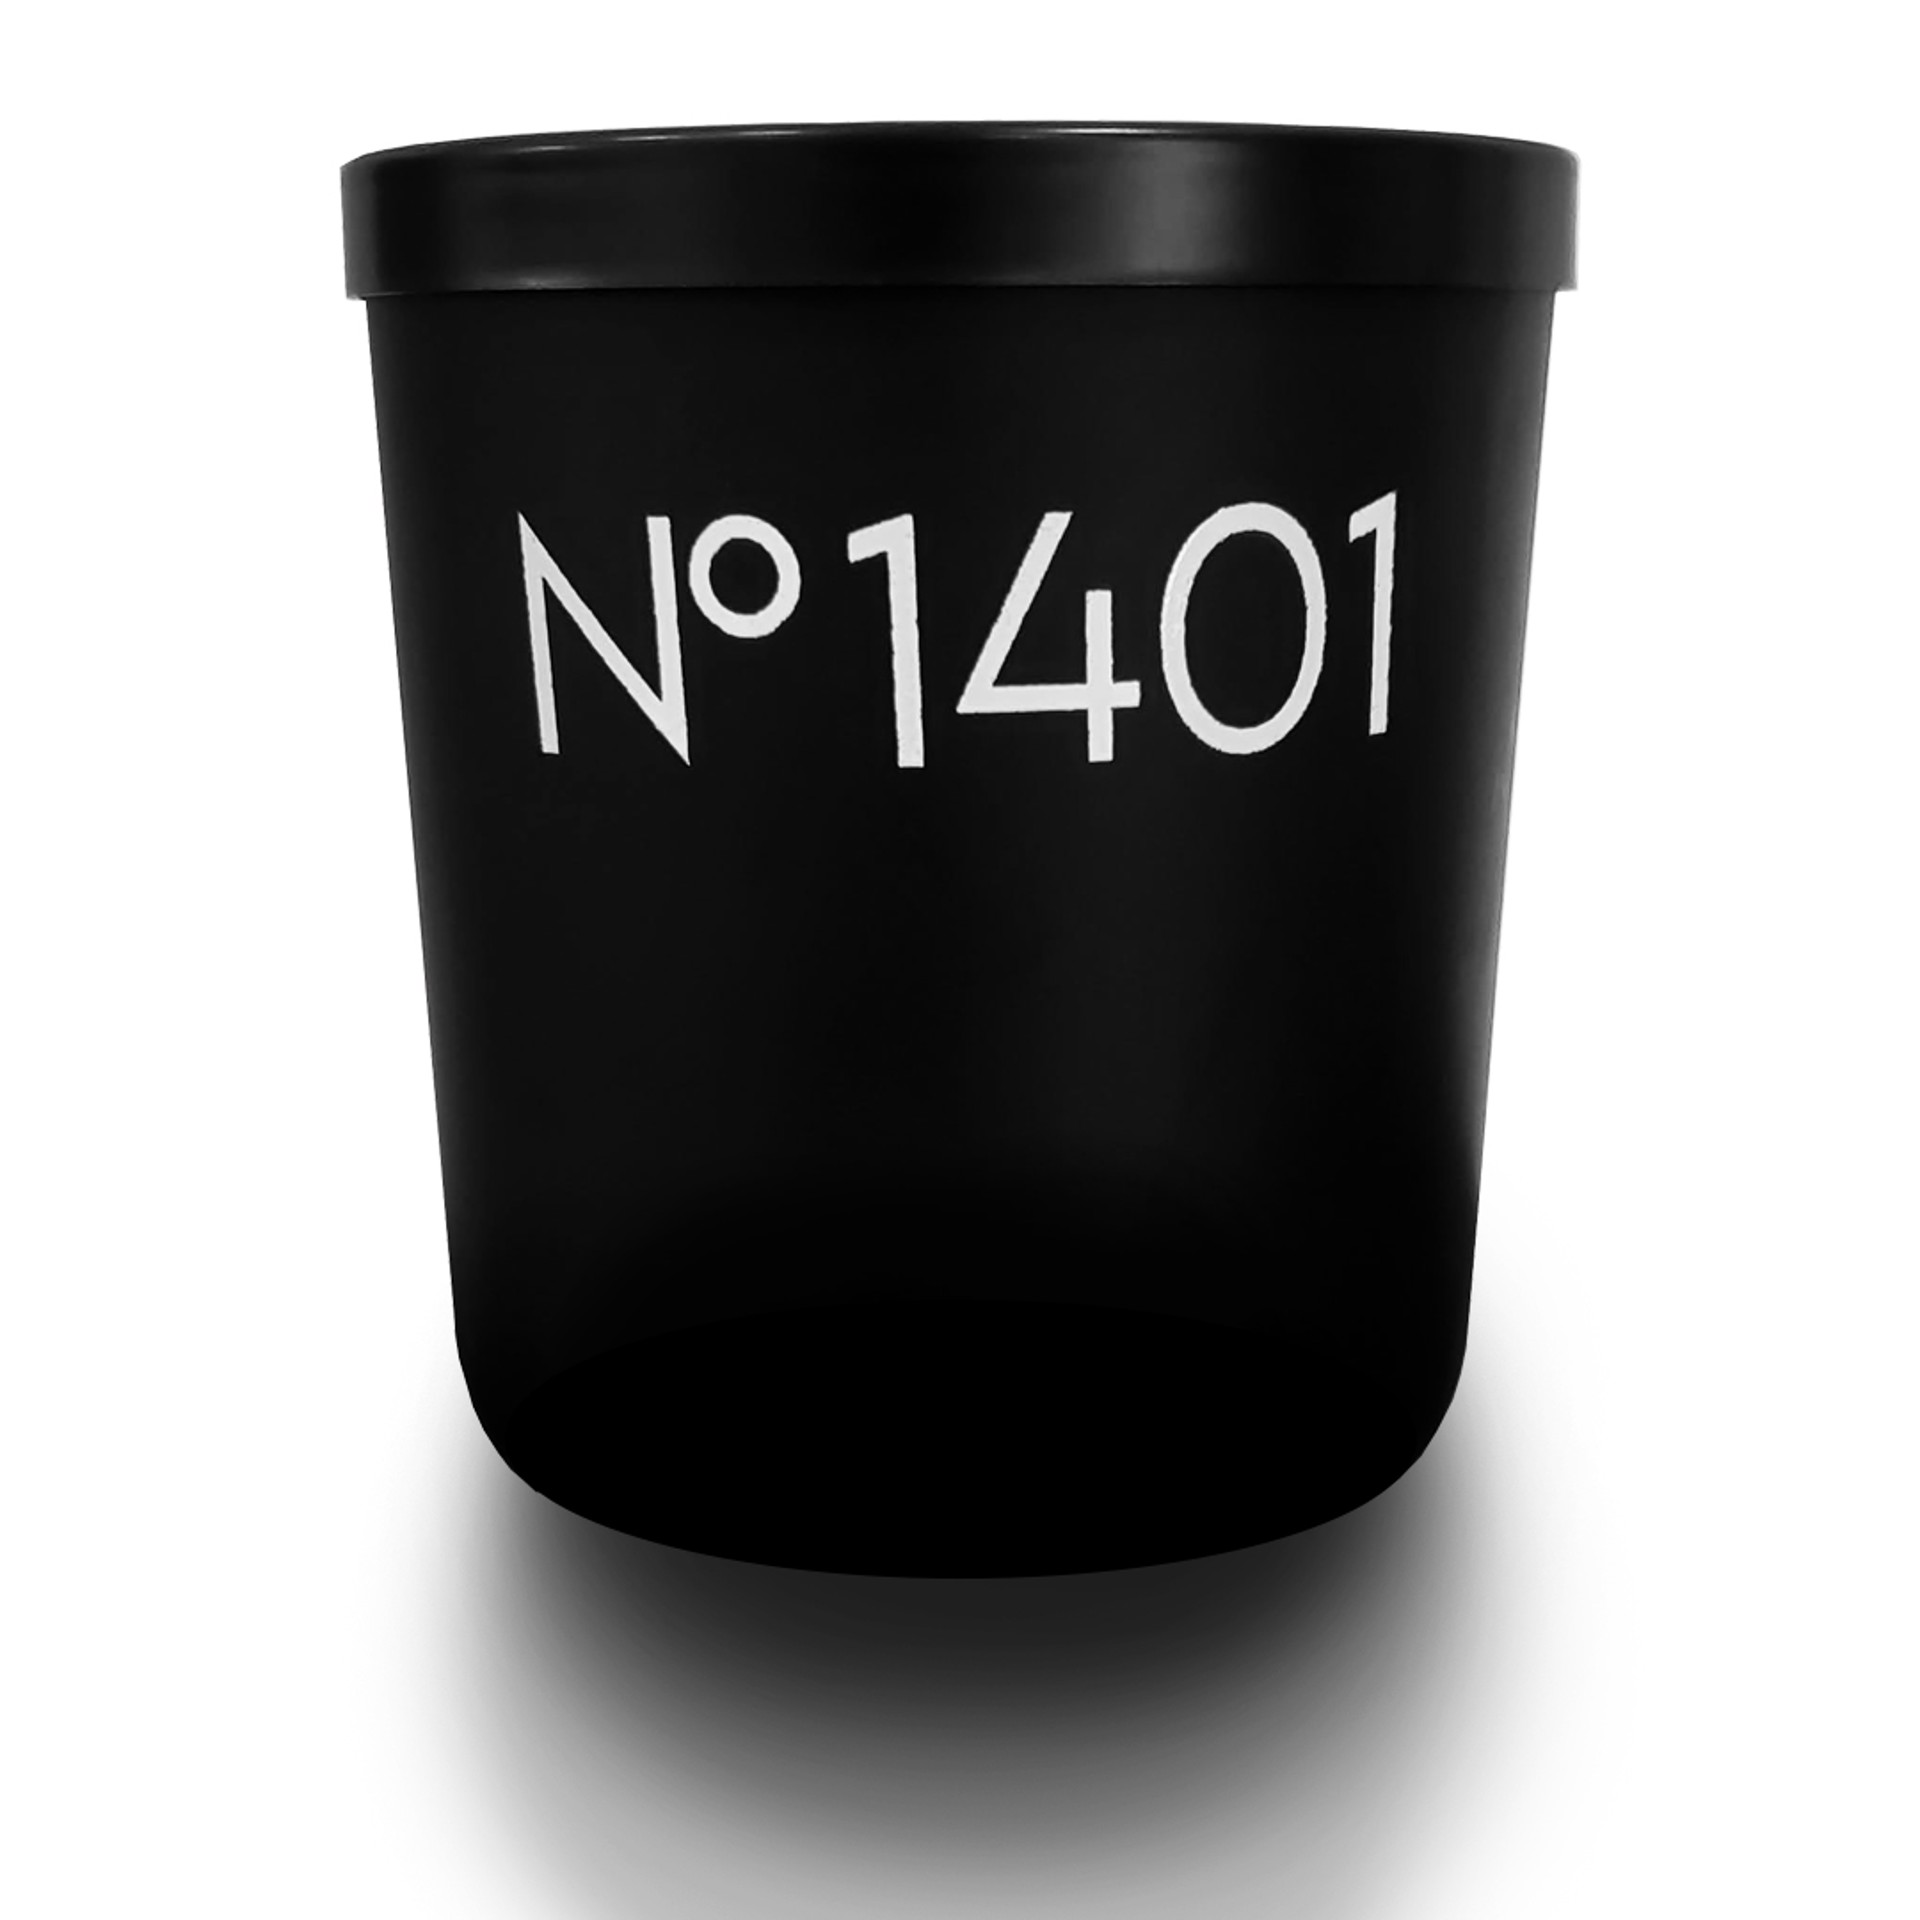 No. 1401 Candle by Argent